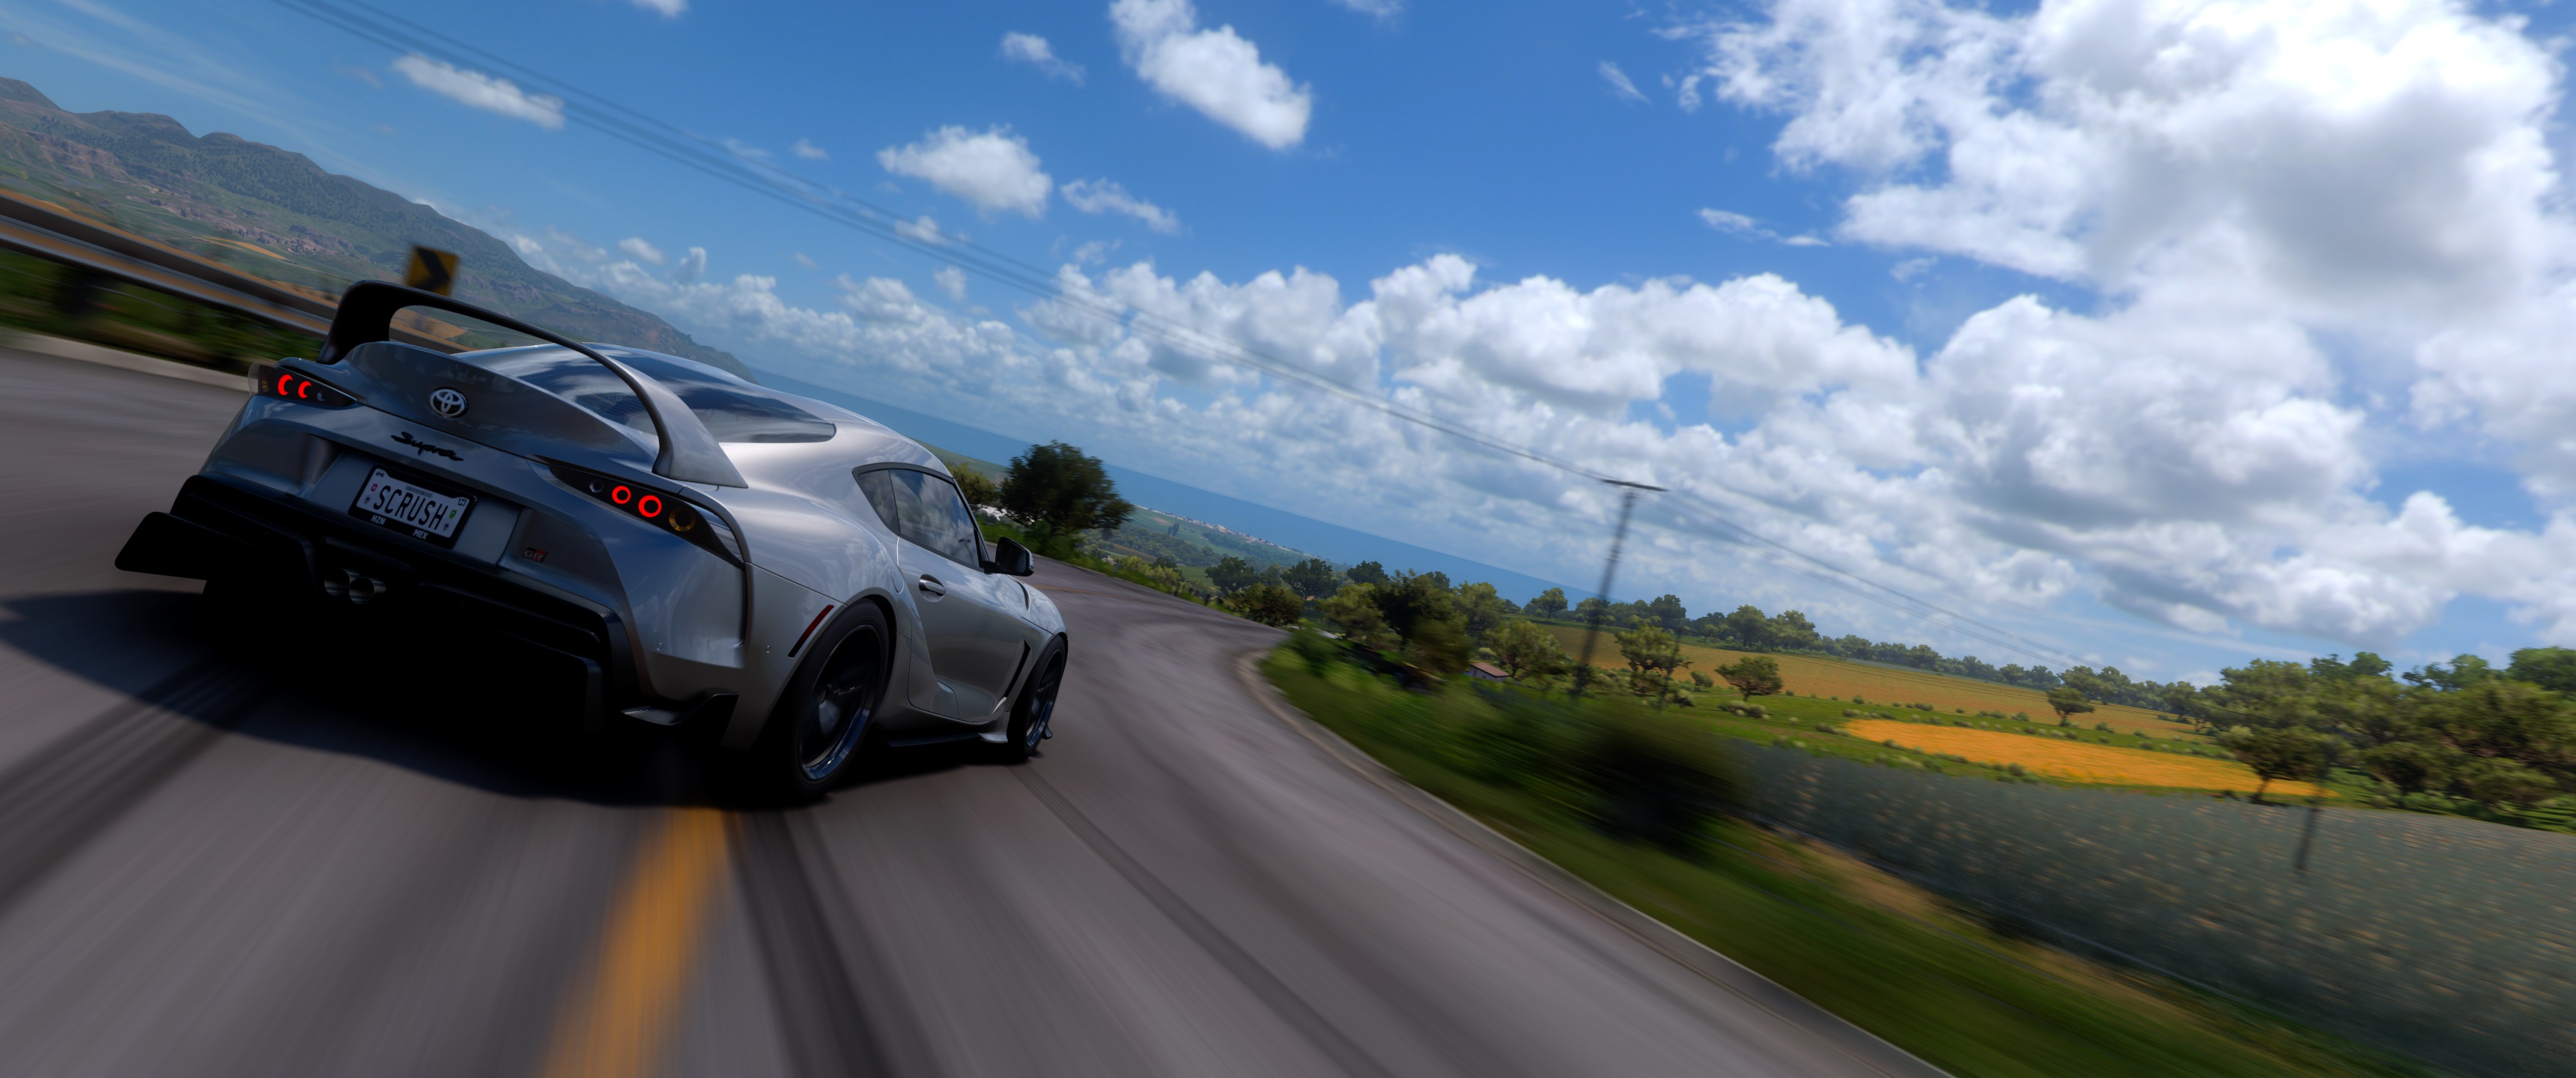 Forza Horizon 5 Video Games Mexico Car Road Taillights Clouds 3440x1440